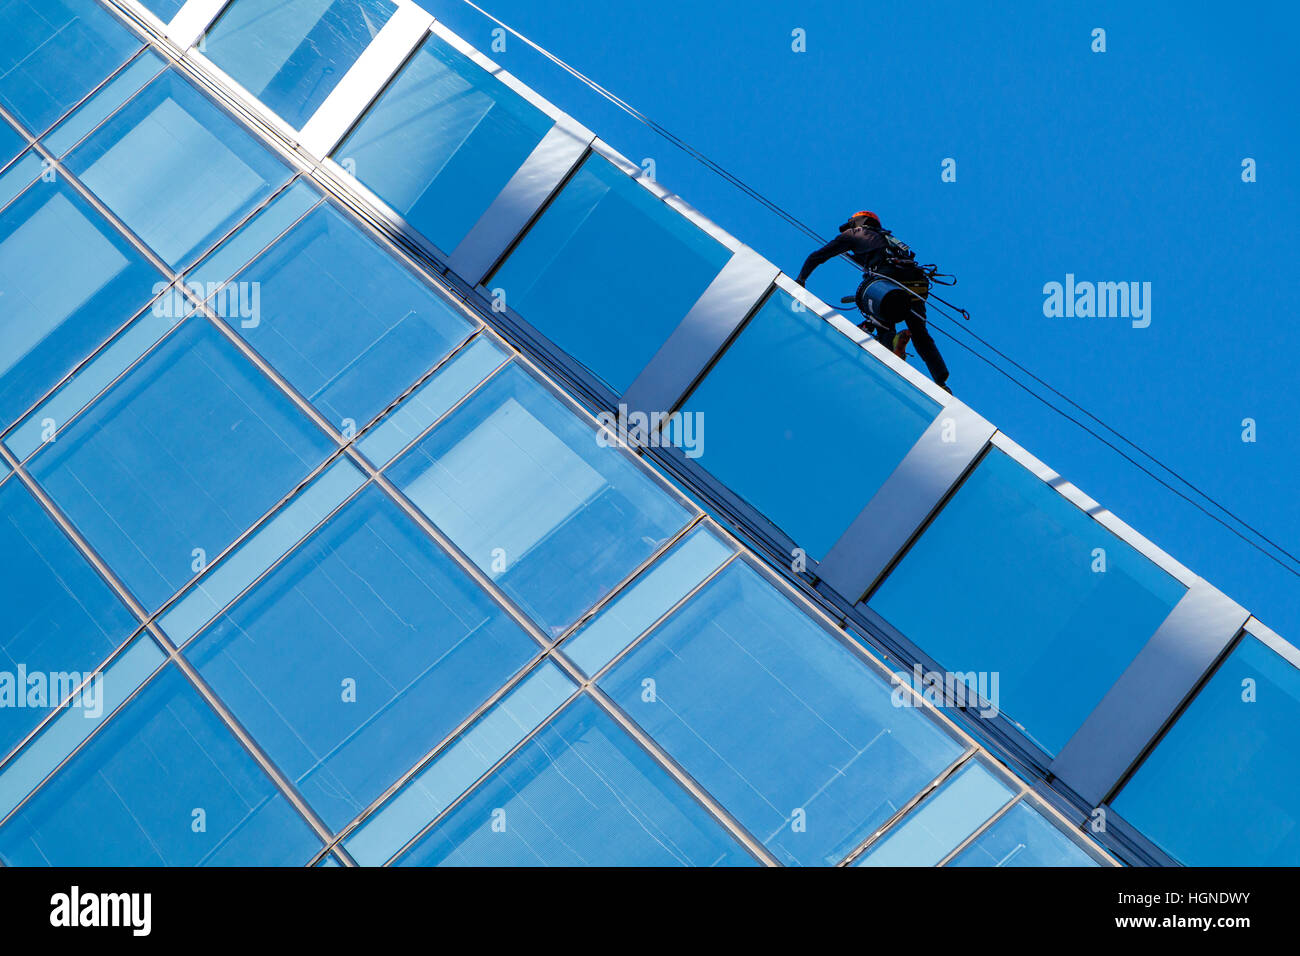 Window cleaning on a glass and steel office block in Vancouver, British Columbia, Canada. Stock Photo